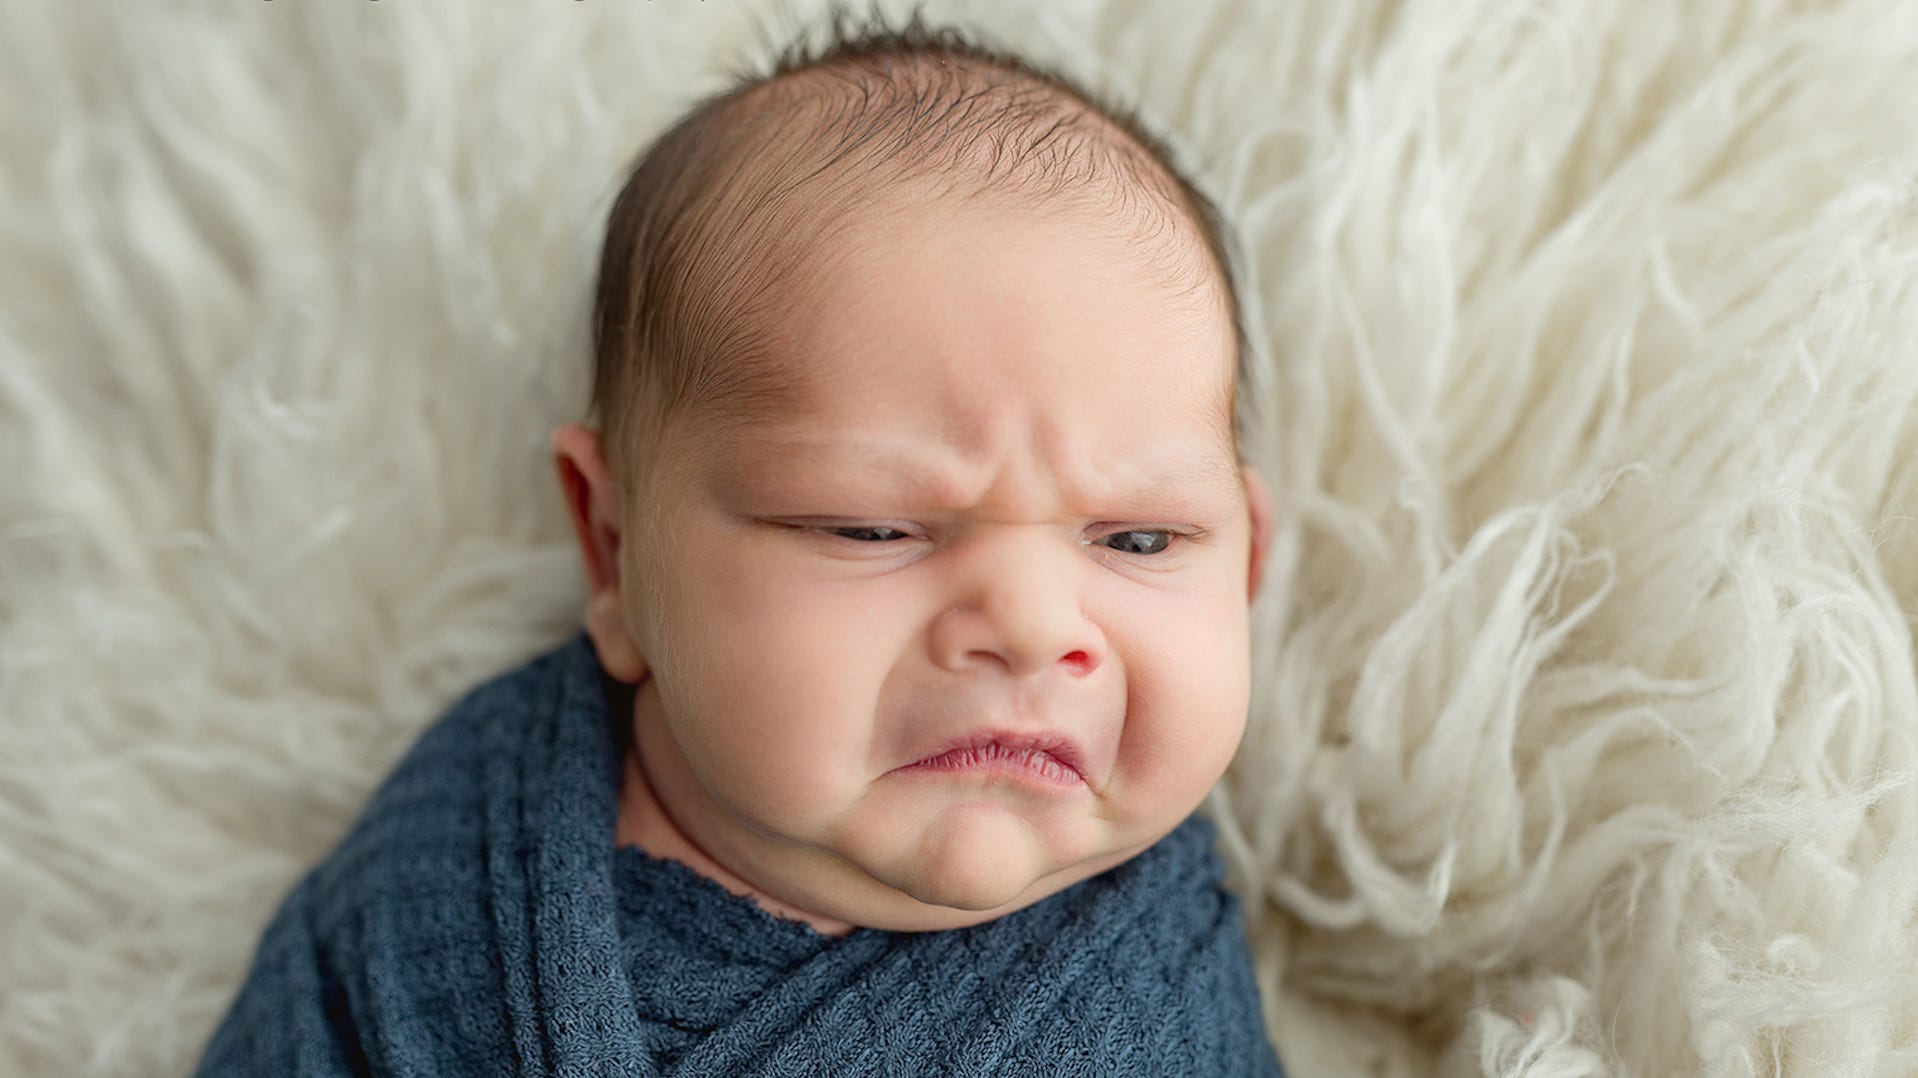 Ohio newborn goes viral for facial expressions during photoshoot